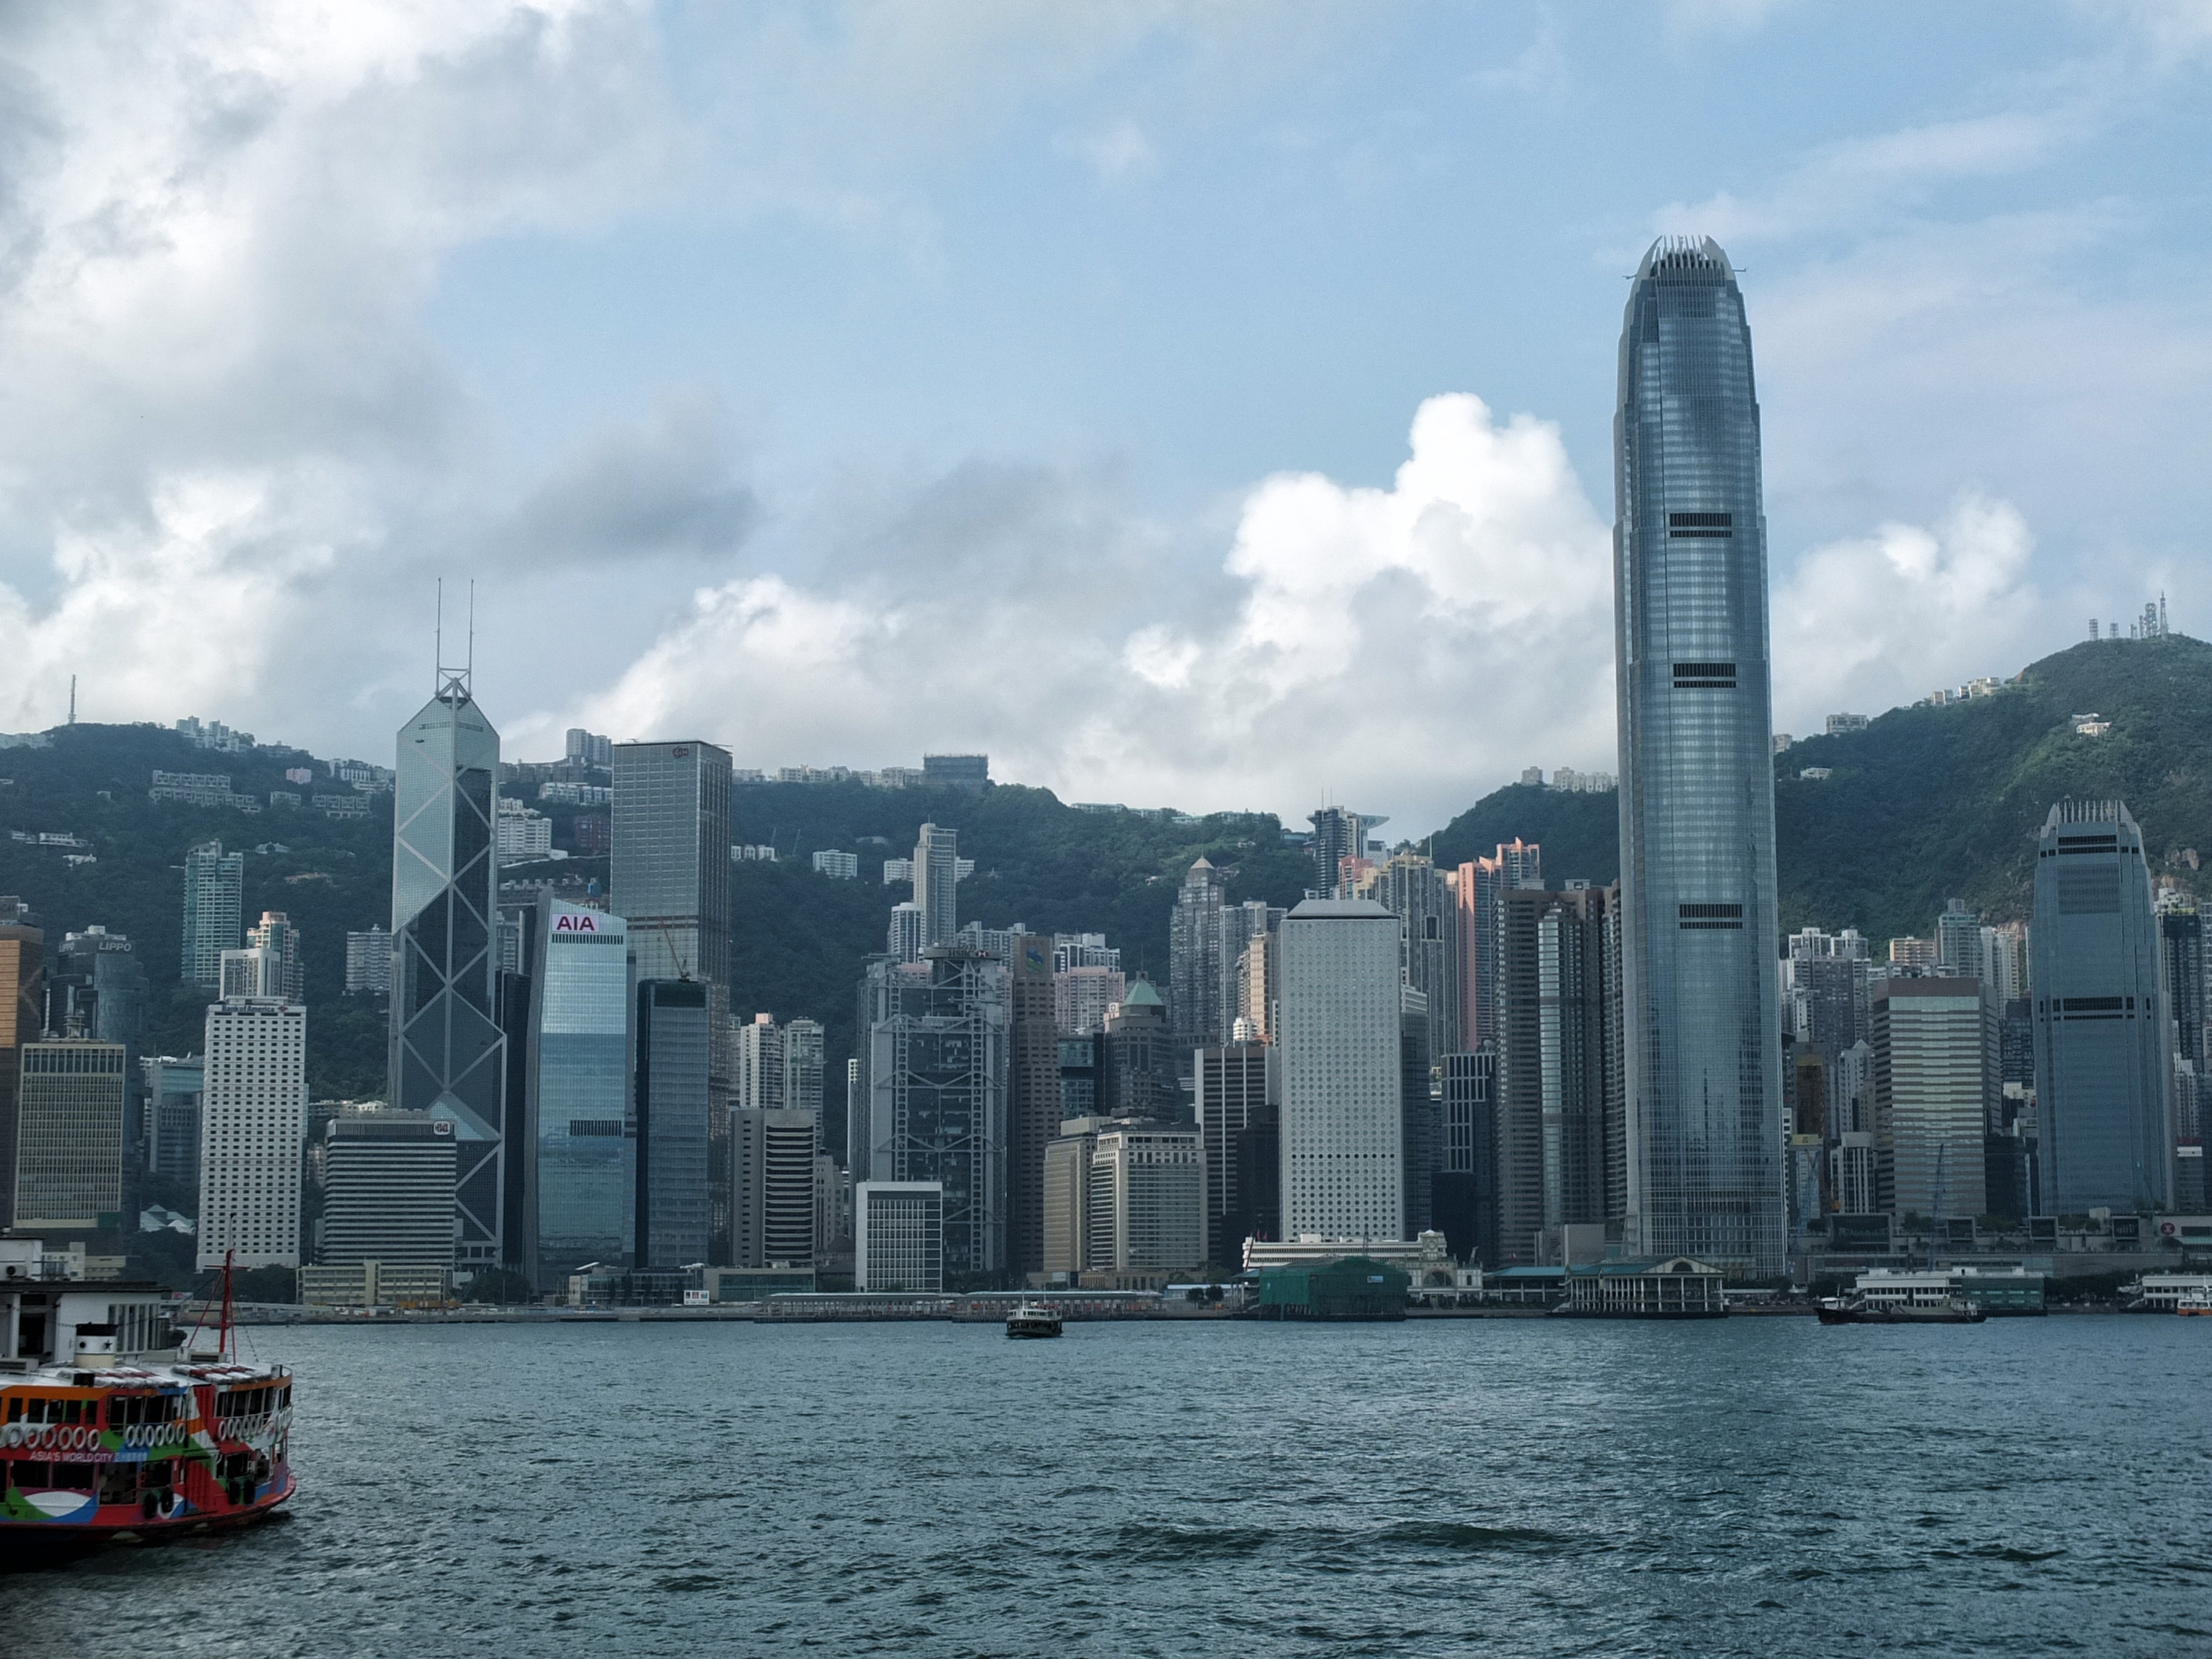 Hong Kong Island, from the Star Ferry